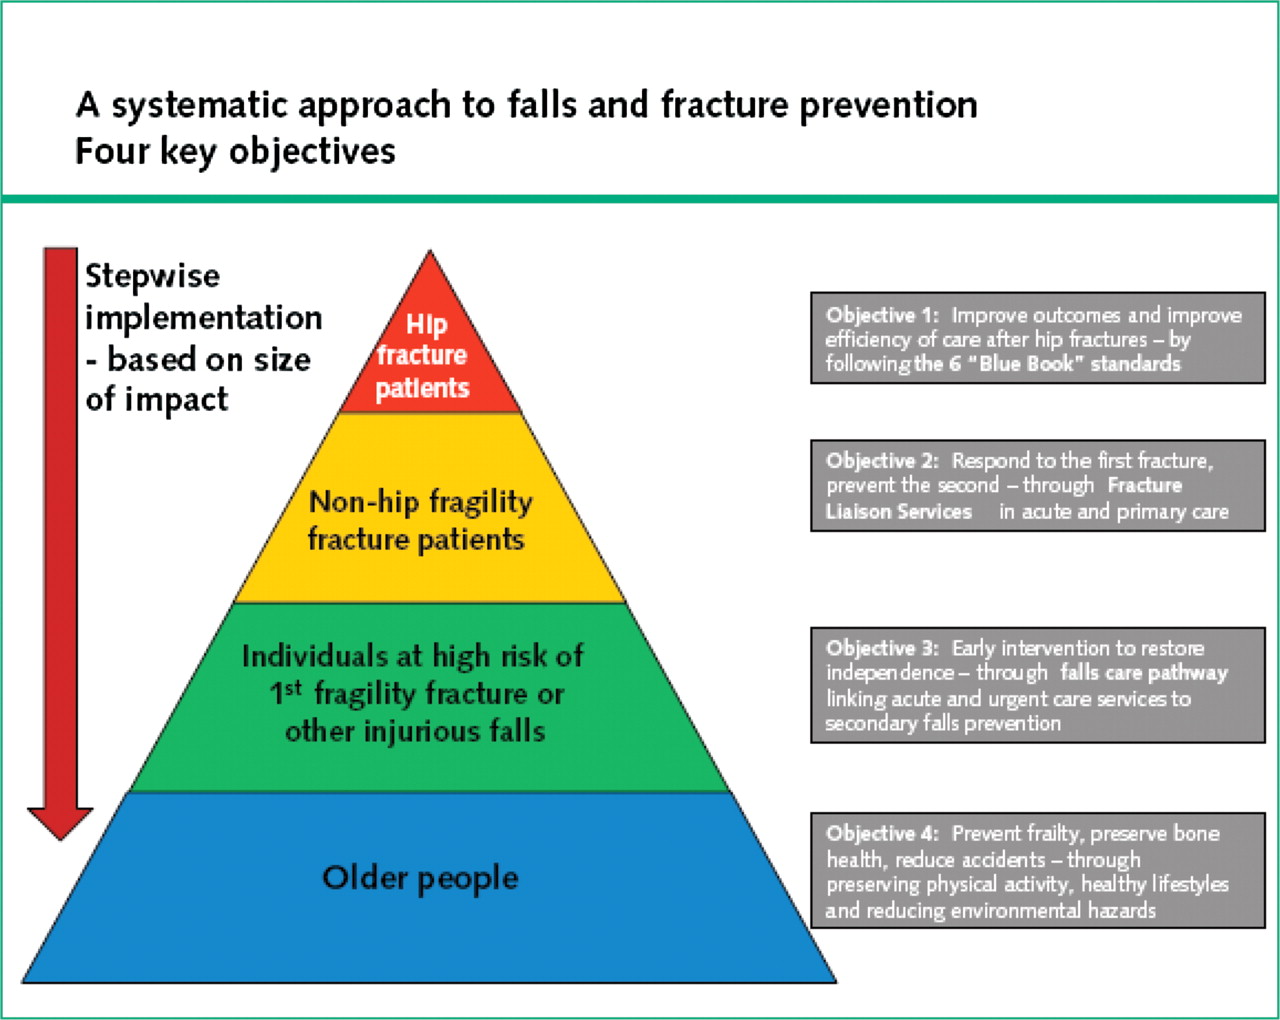 Martin F. Next steps for fall and fracture prevention. Age Ageing 2009;38:640-643.